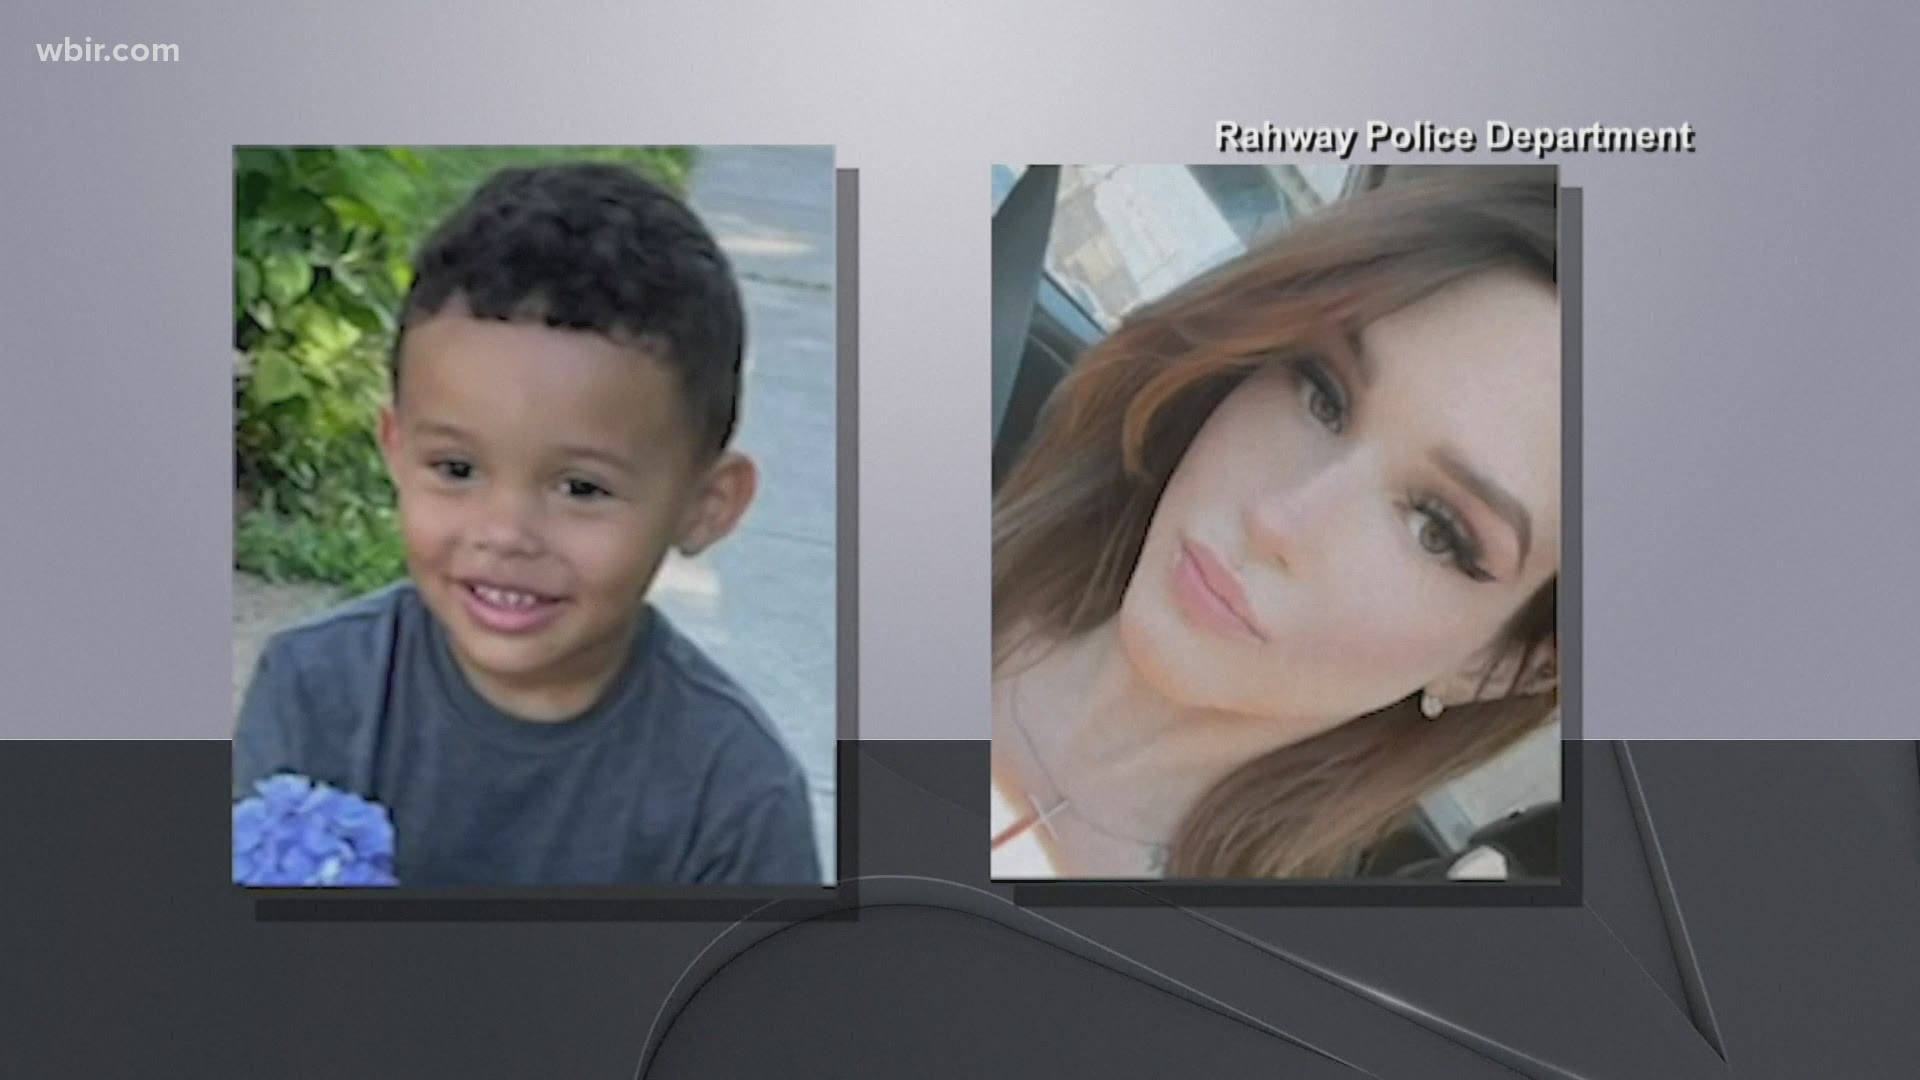 Her son was found unharmed; the father was arrested and is currently being held at Putnam County jail.